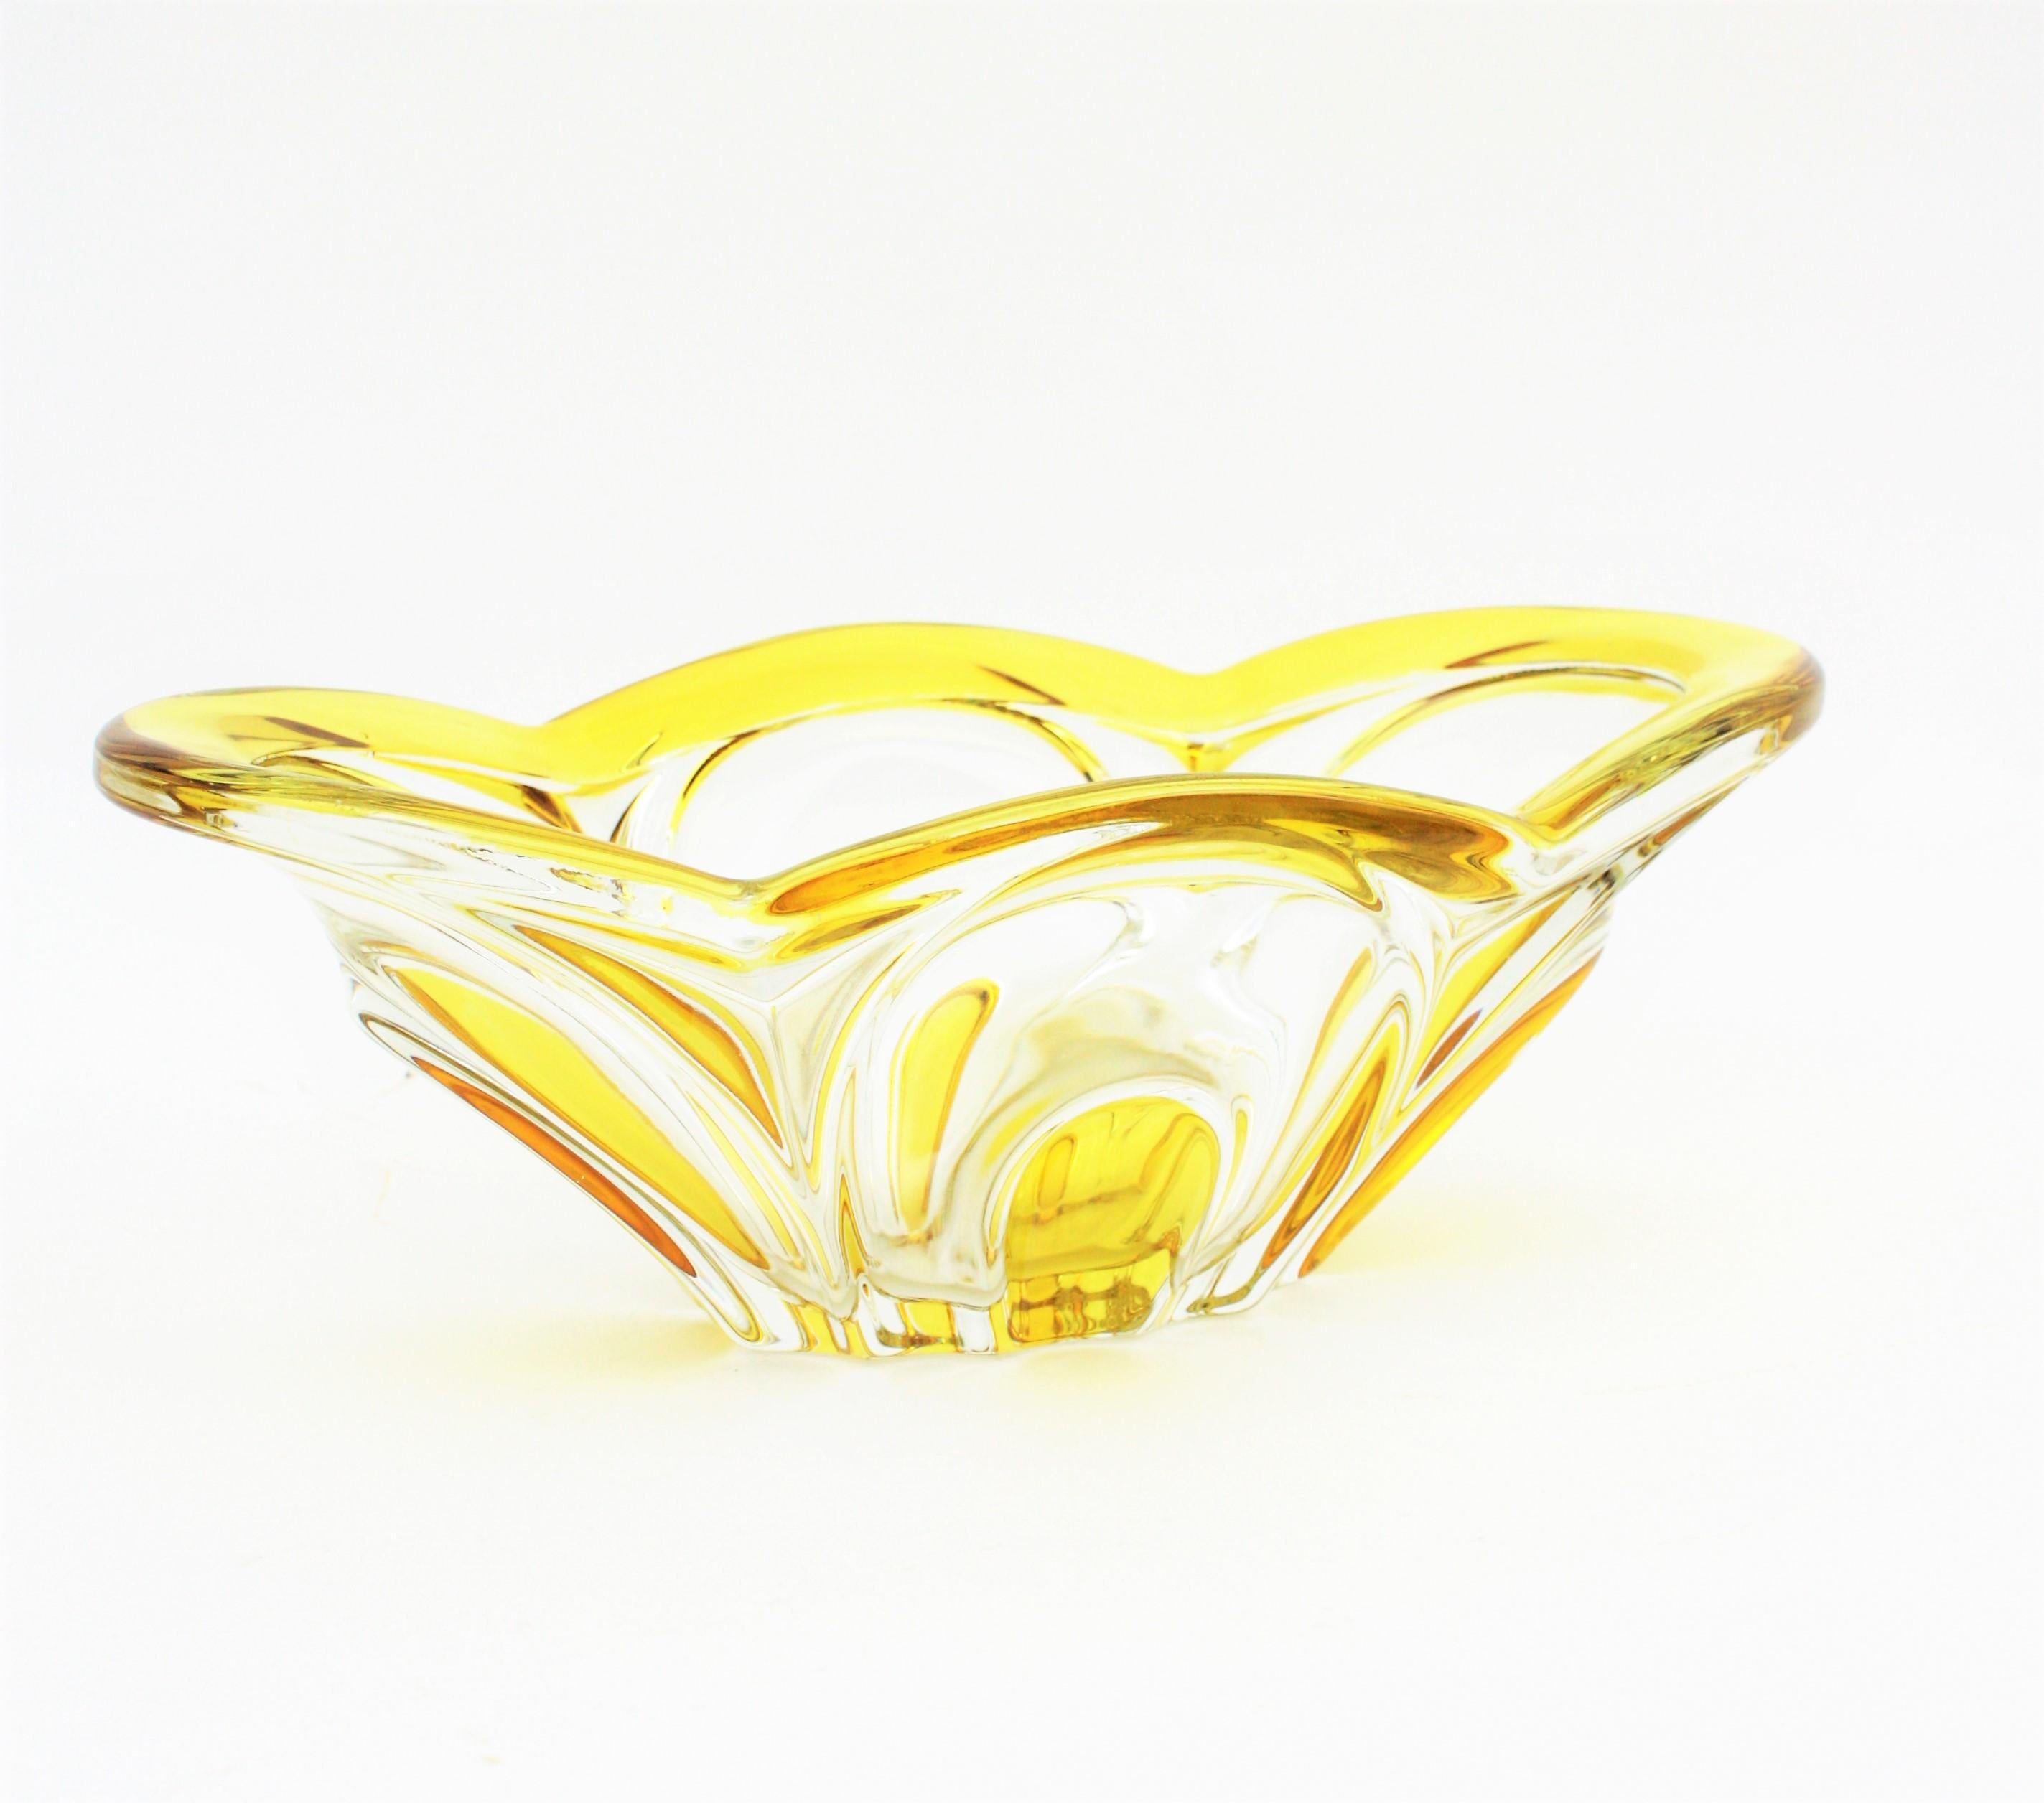 Beautiful handblown Murano glass centerpiece or vase made in clear glass with highly decorative yellow details and scalloped yellow rim edge.
Italy, 1950s. Lovely to be used as centerpiece, fruit centrepiece or vide-poche.

Avaliable a huge